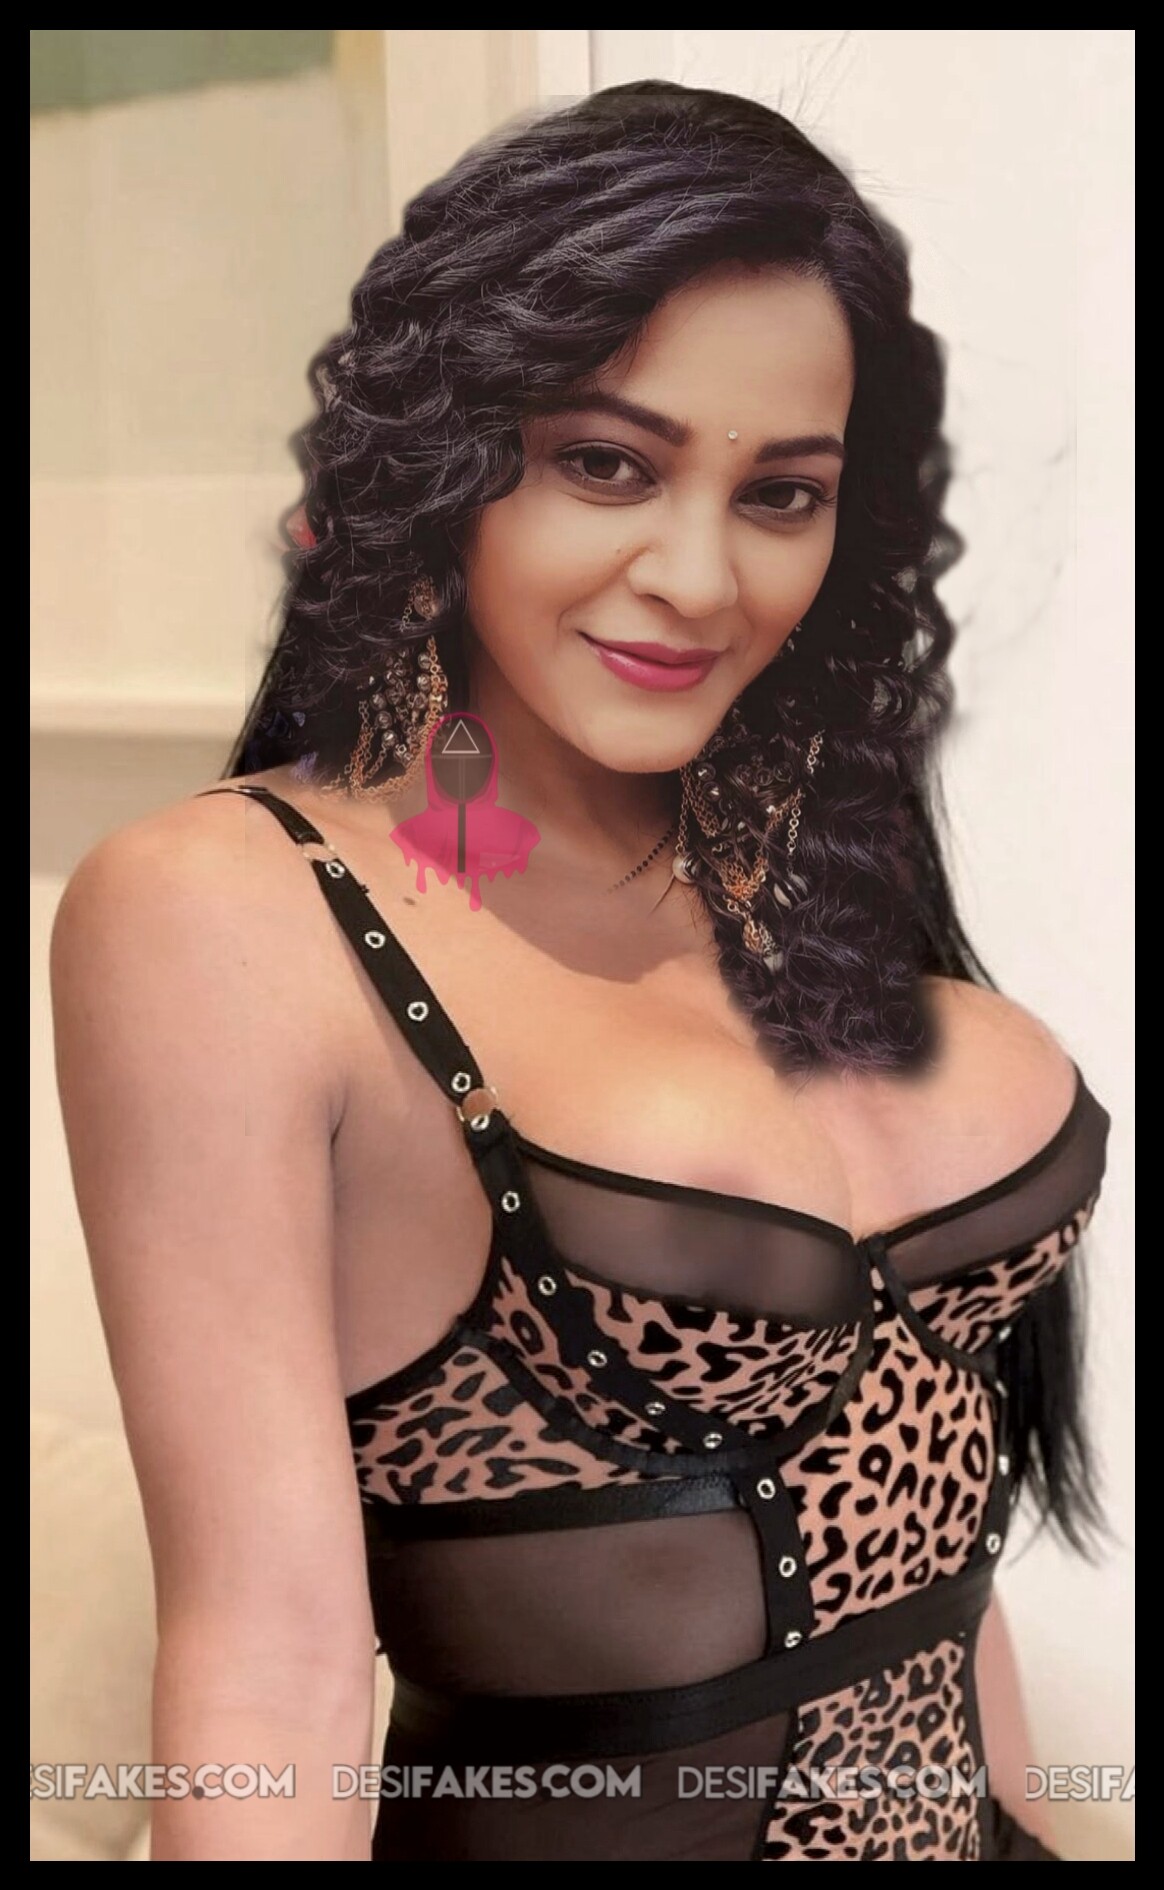 Xxxanemalshd - Indian Tv Actress Bollywood Nude | Sex Pictures Pass